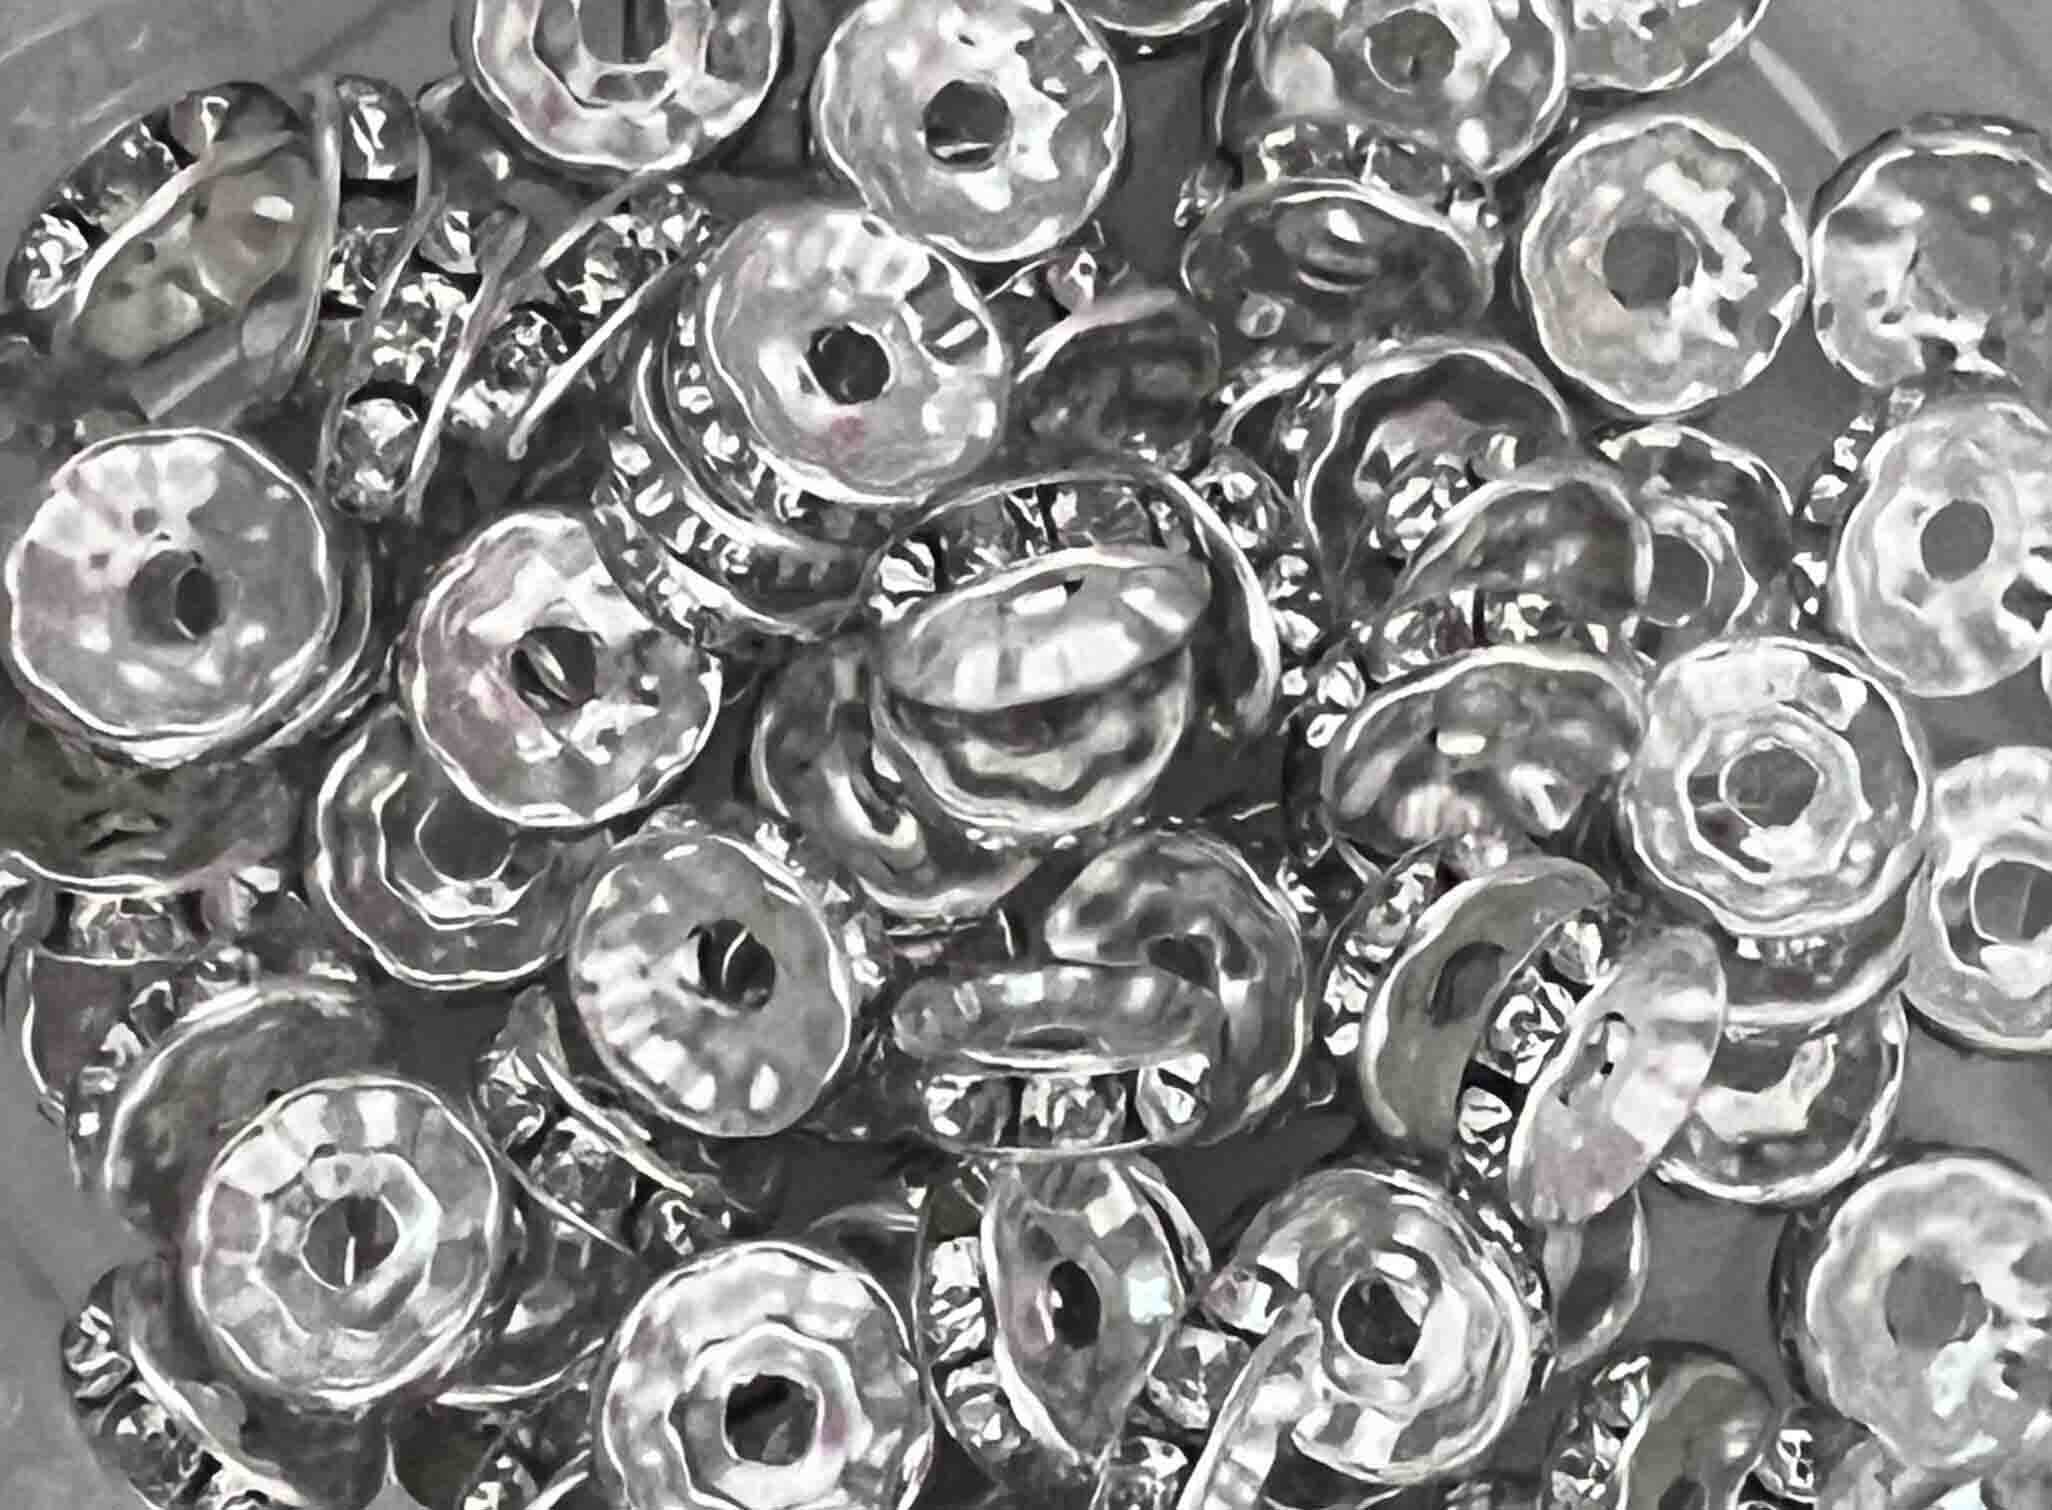 Small Silver spacer Beads Dazzling beads For Bracelet Pendant